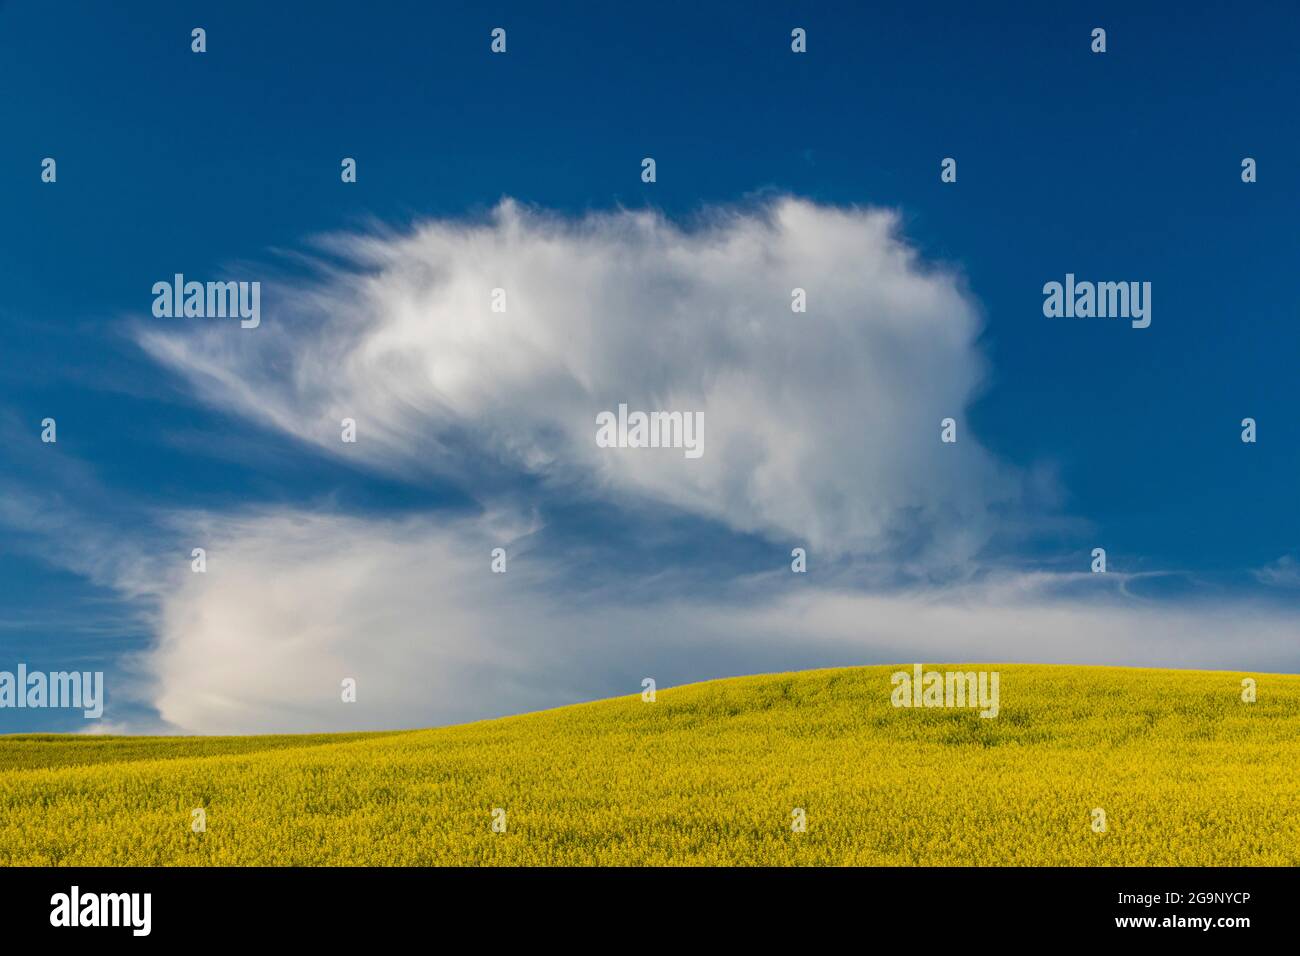 Clouds over the Canola fields in Palouse region of Washington Stock Photo